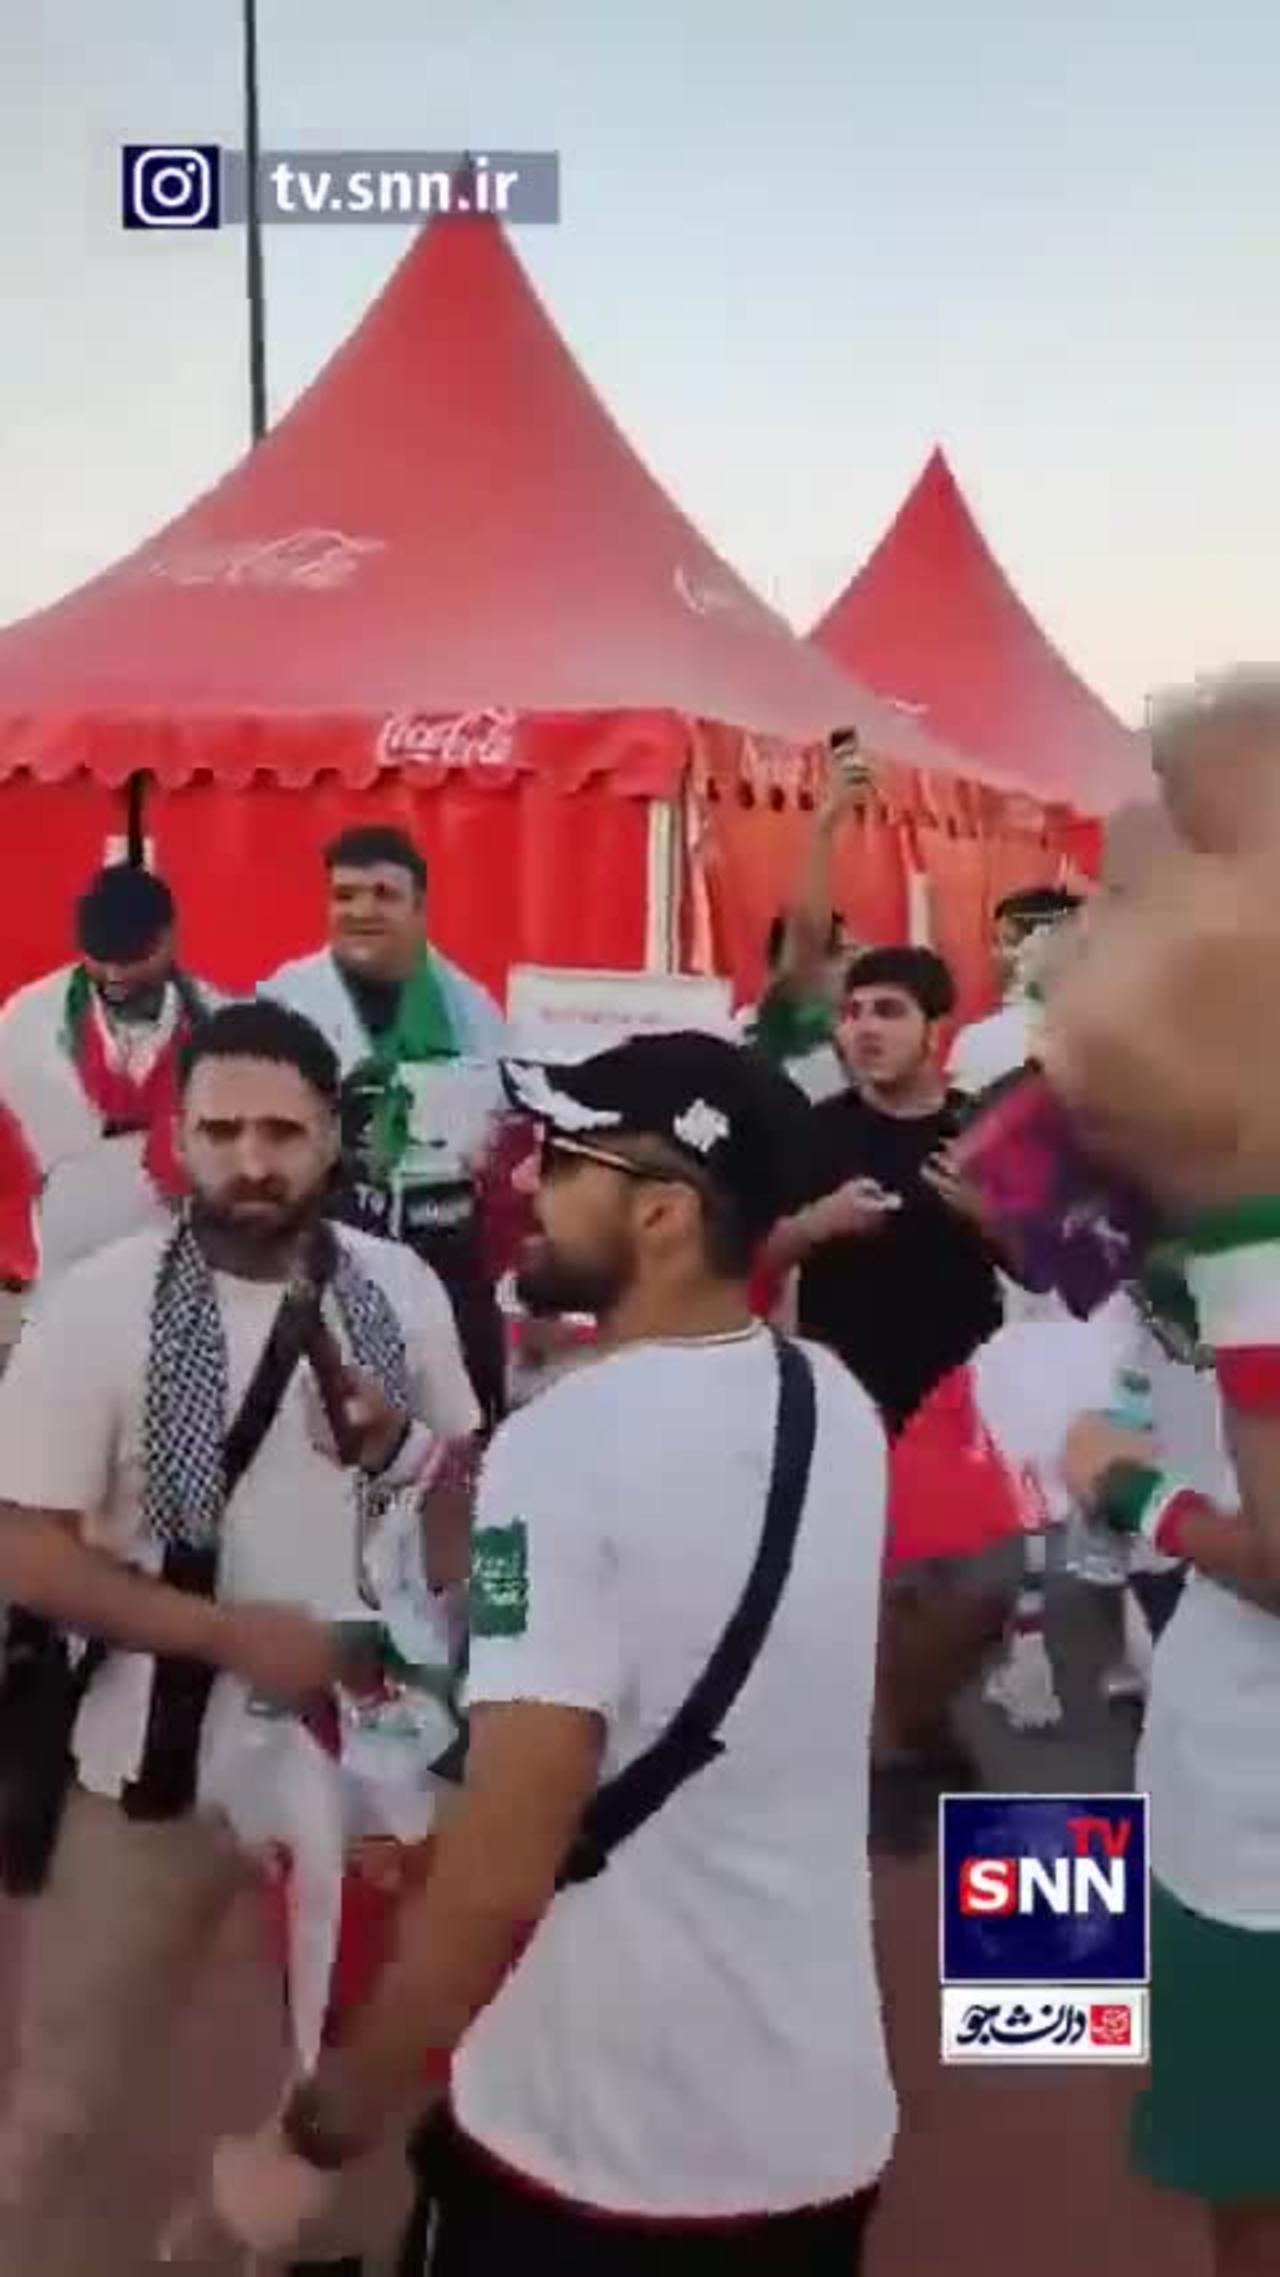 Iran fans shouting “Palestine” in front of an Israeli TV correspondent at FIFA World Cup 2022